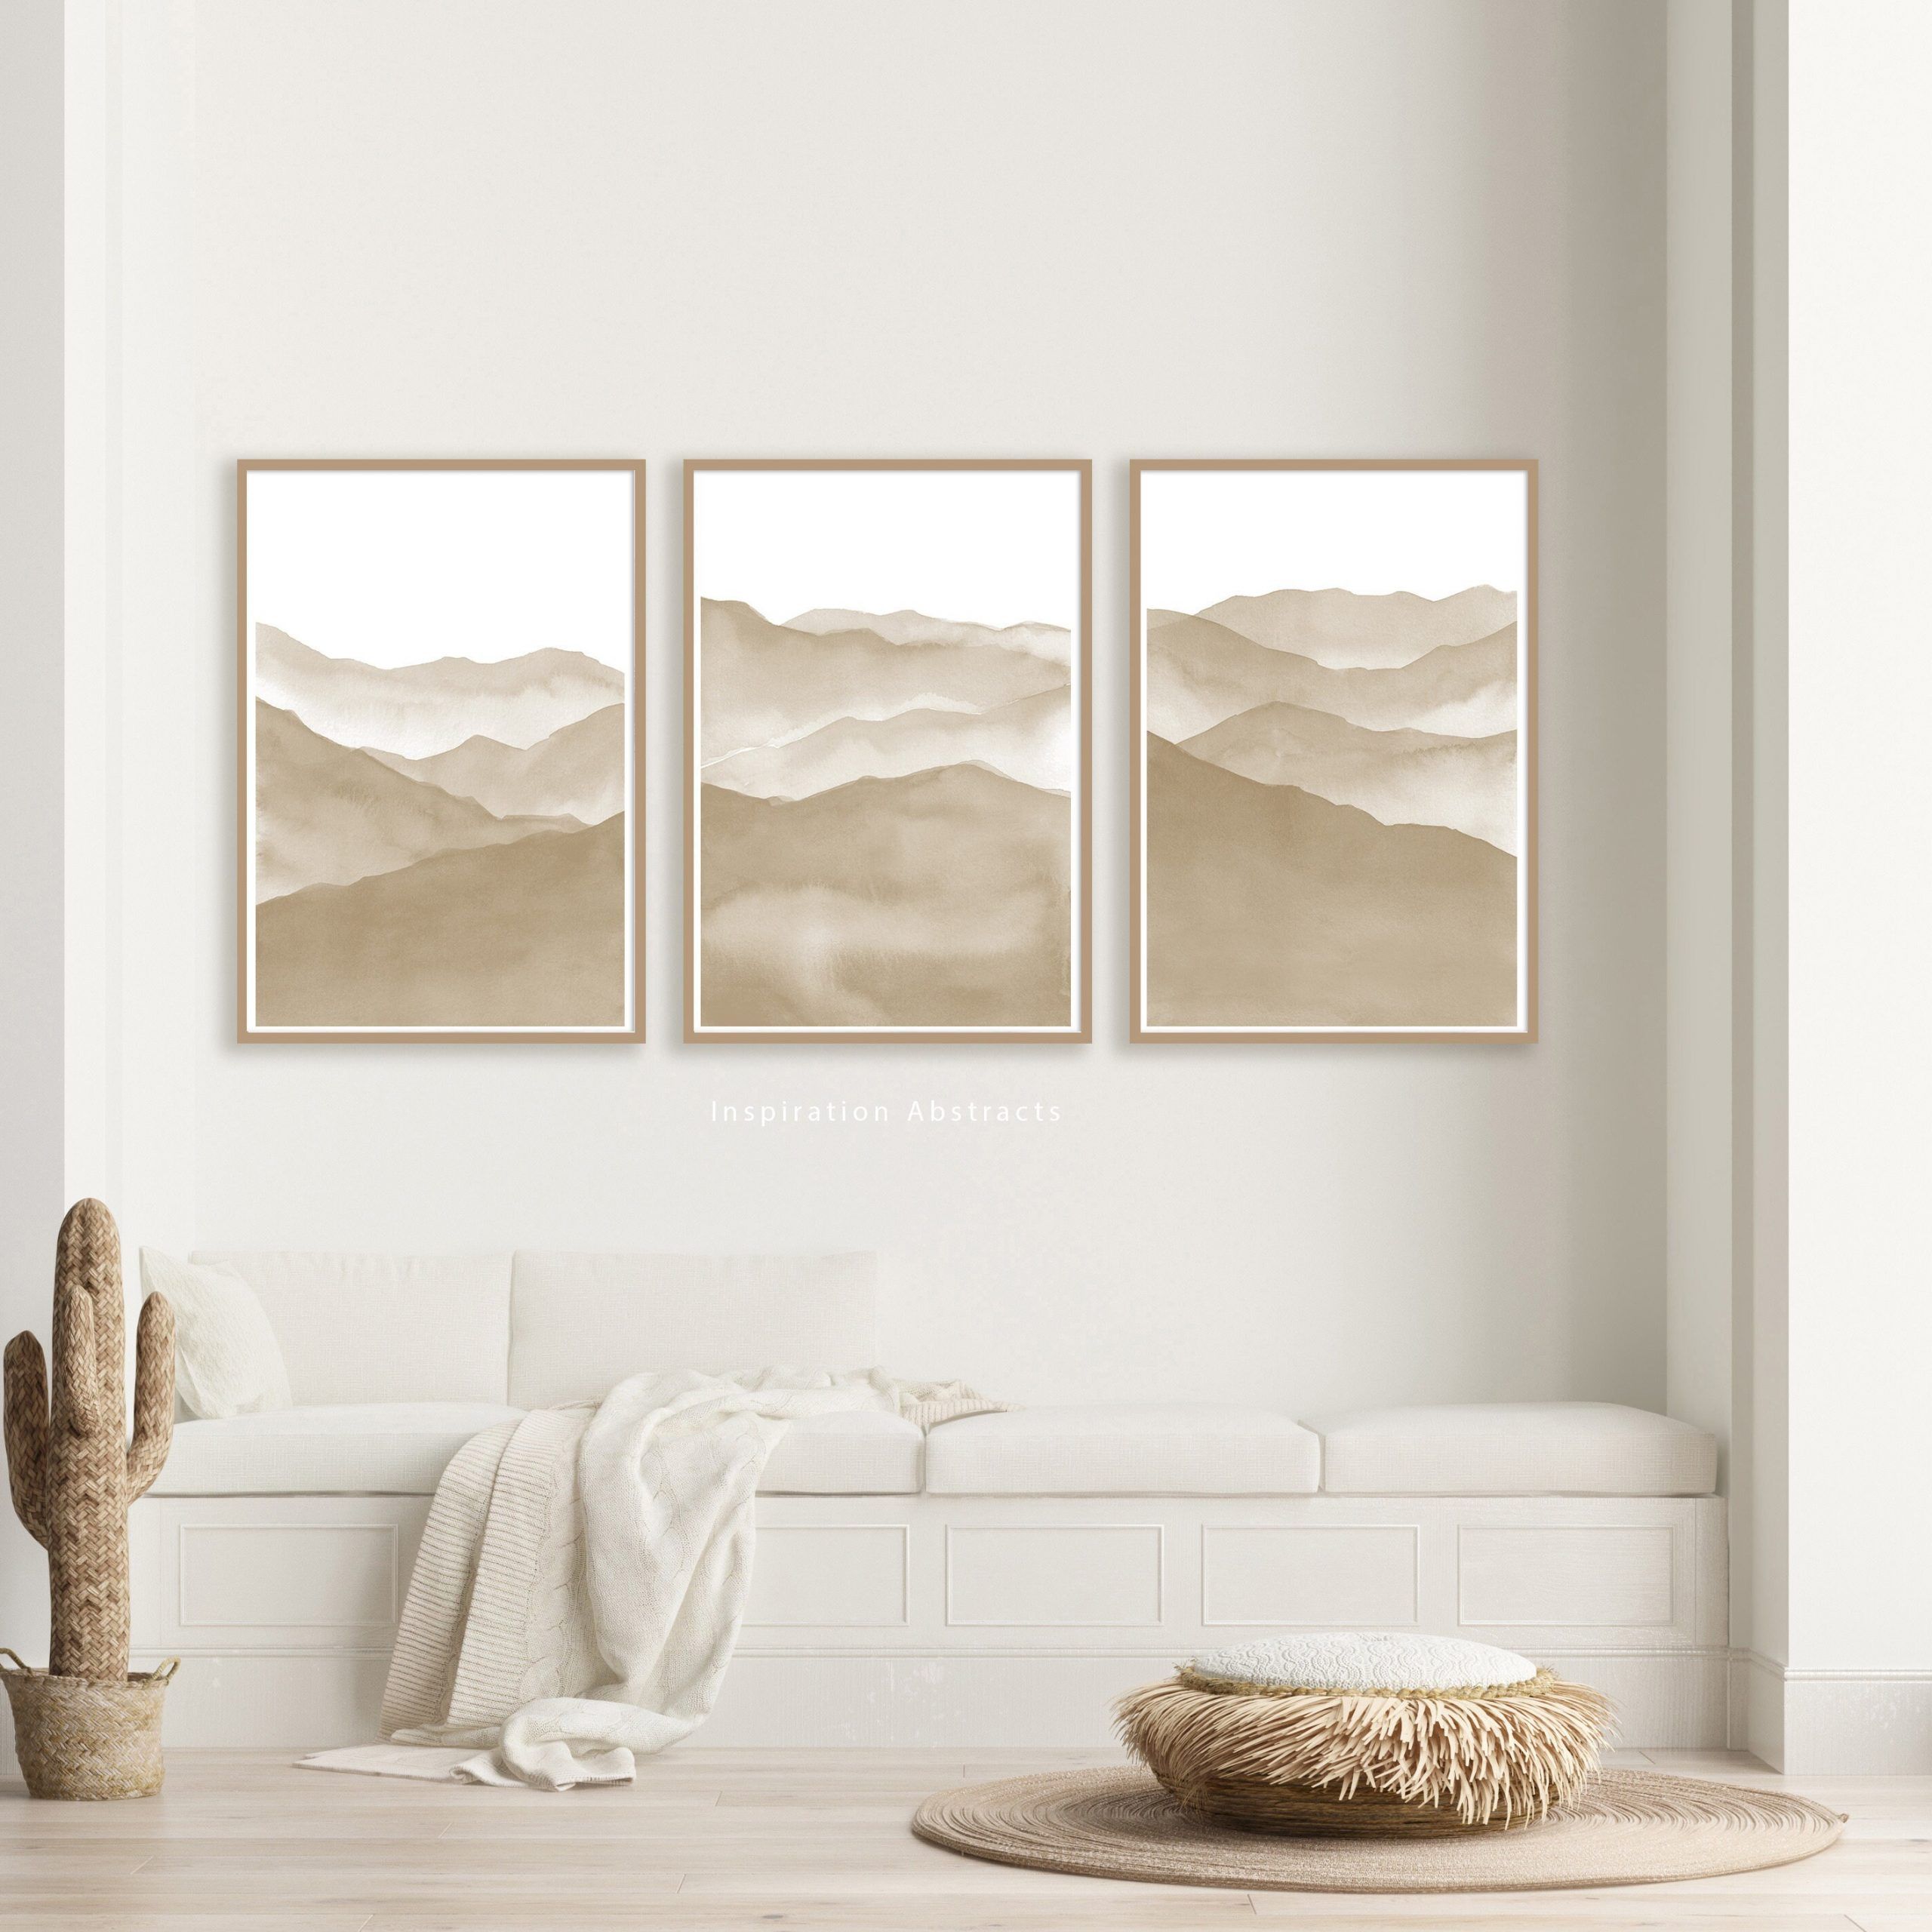 Minimal Beige Mountain Prints 3 Piece Wall Art Zen Wall Art – Etsy France Pertaining To Most Current Beige Wall Art (View 2 of 20)